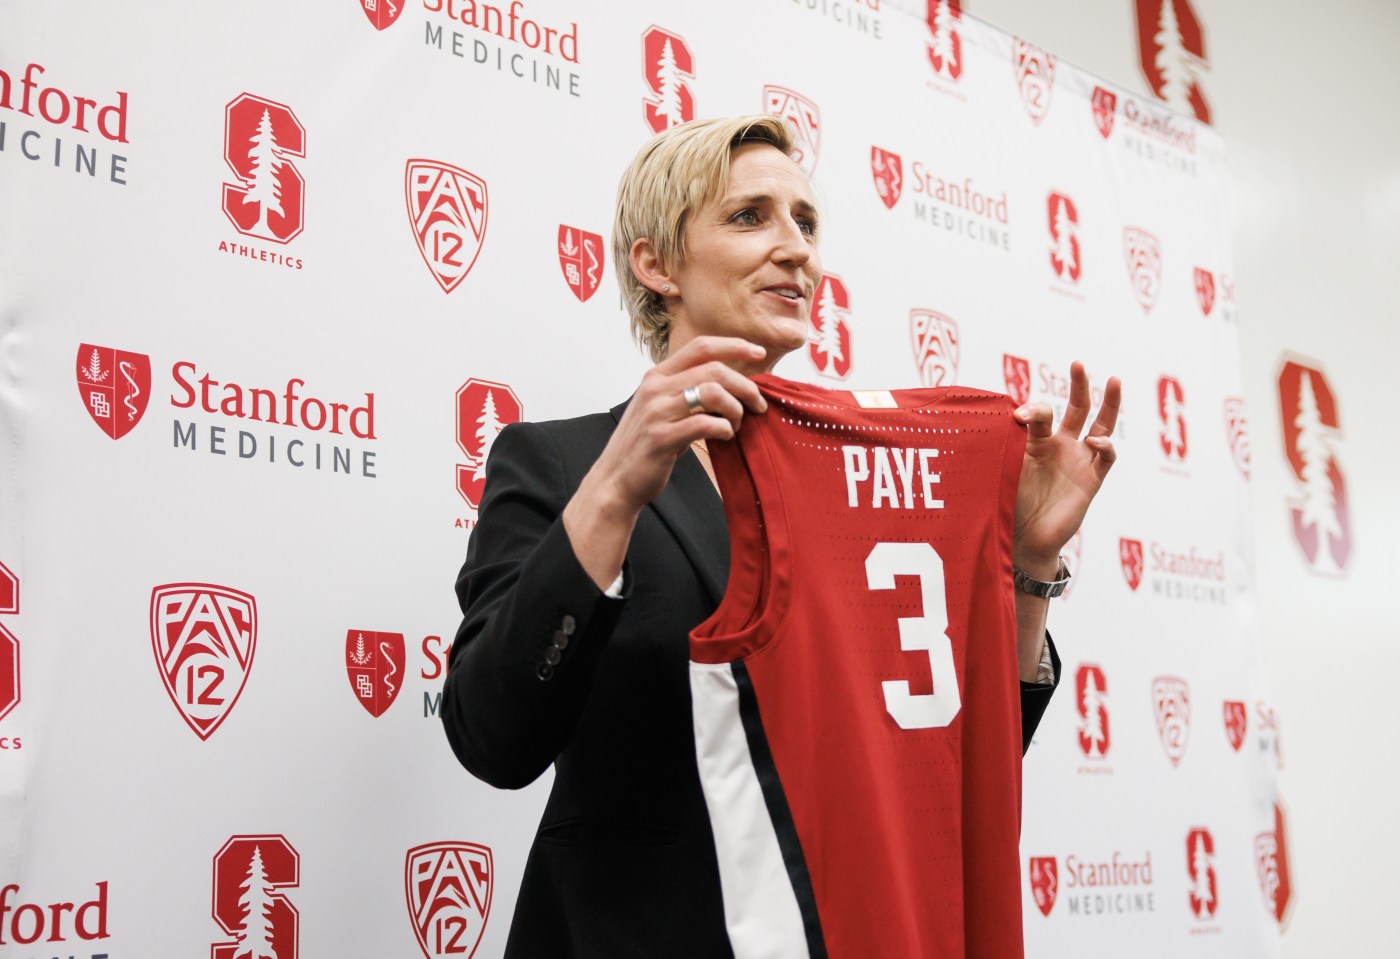 paye-ready-to-try-and-fill-vanderveer’s-shoes-—-and-chair-—-as-stanford’s-women’s-basketball-head-coach